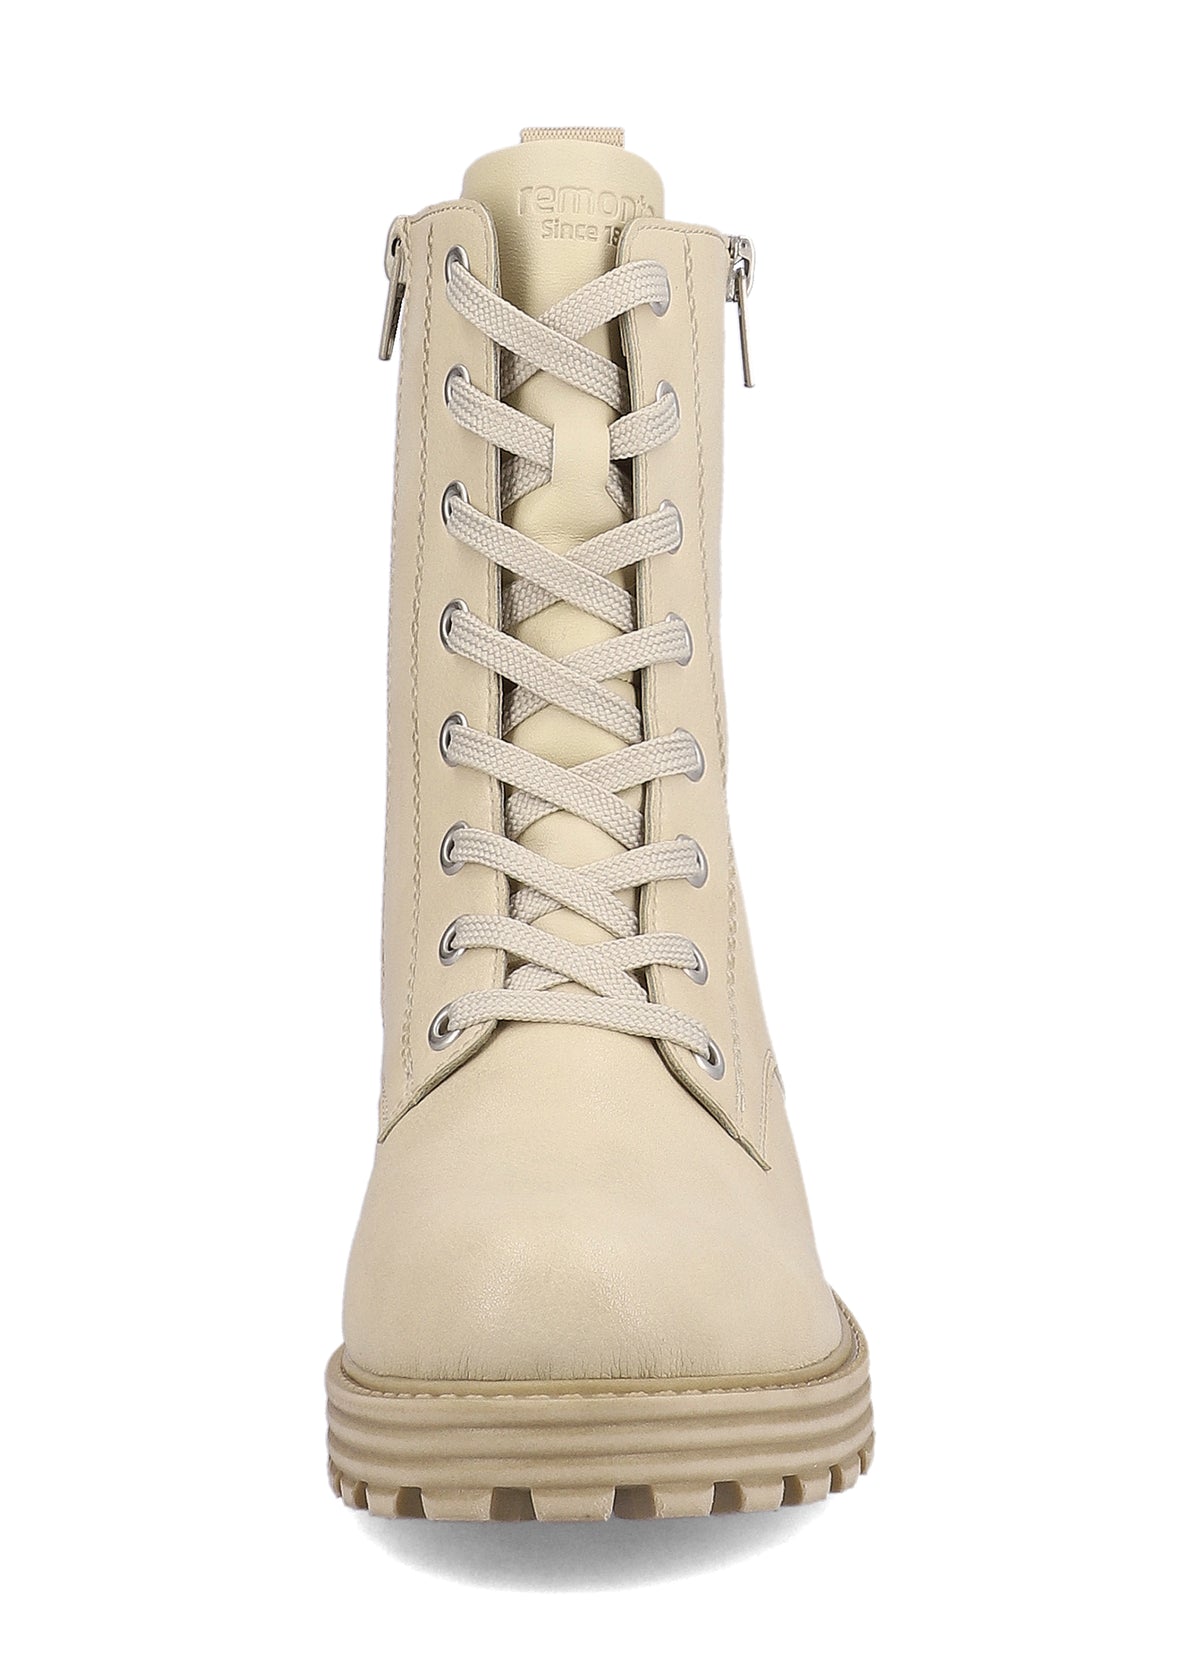 Winter ankle boots with a thick sole - beige